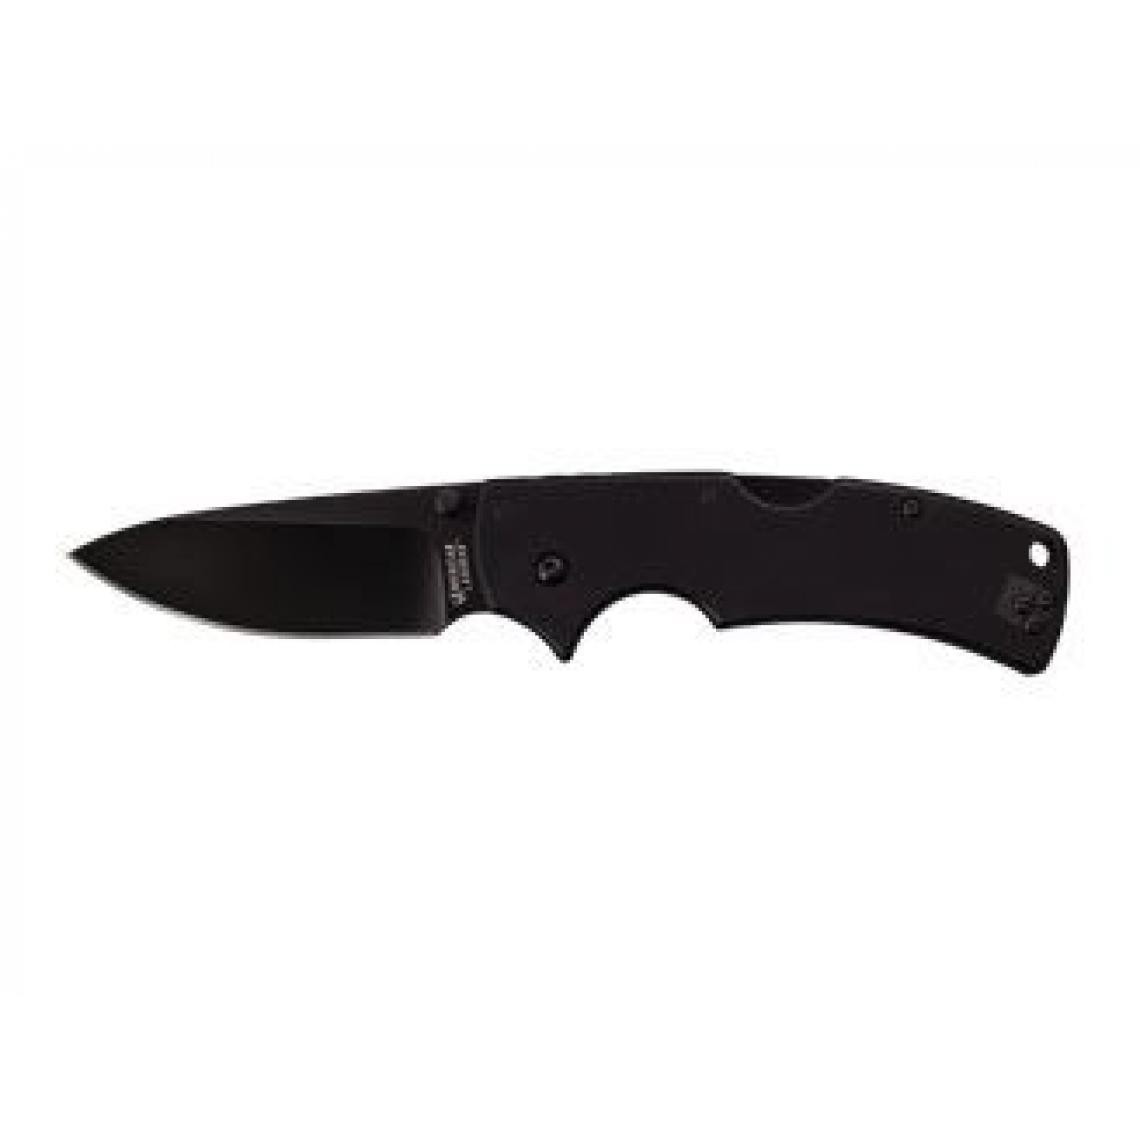 Divers Marques - Cold Steel AMERICAN LAWMAN S325VN STEEL 58B - Outils de coupe